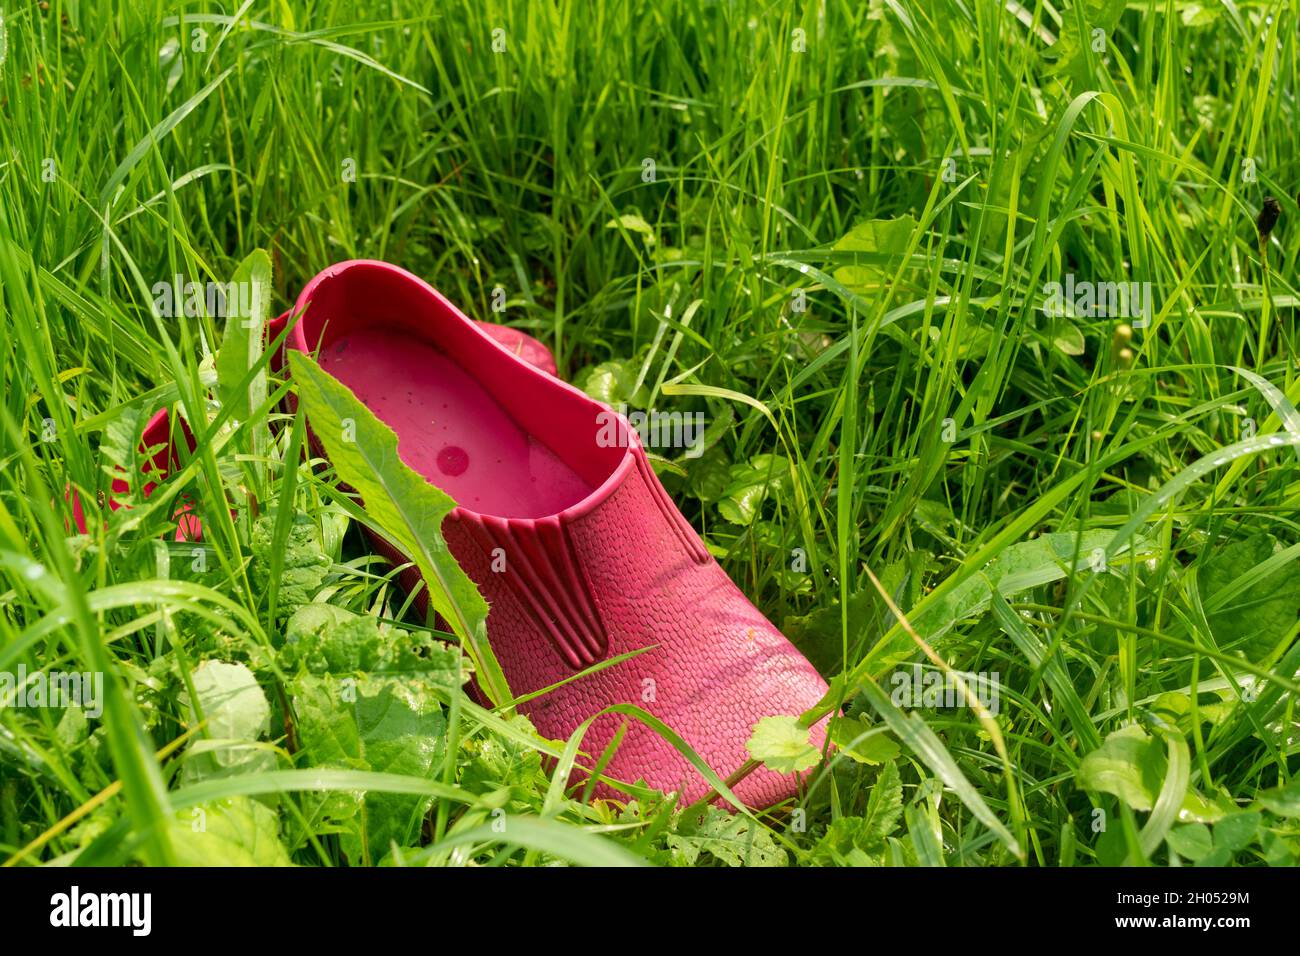 A pair of pink rubber galoshes in the green grass Stock Photo